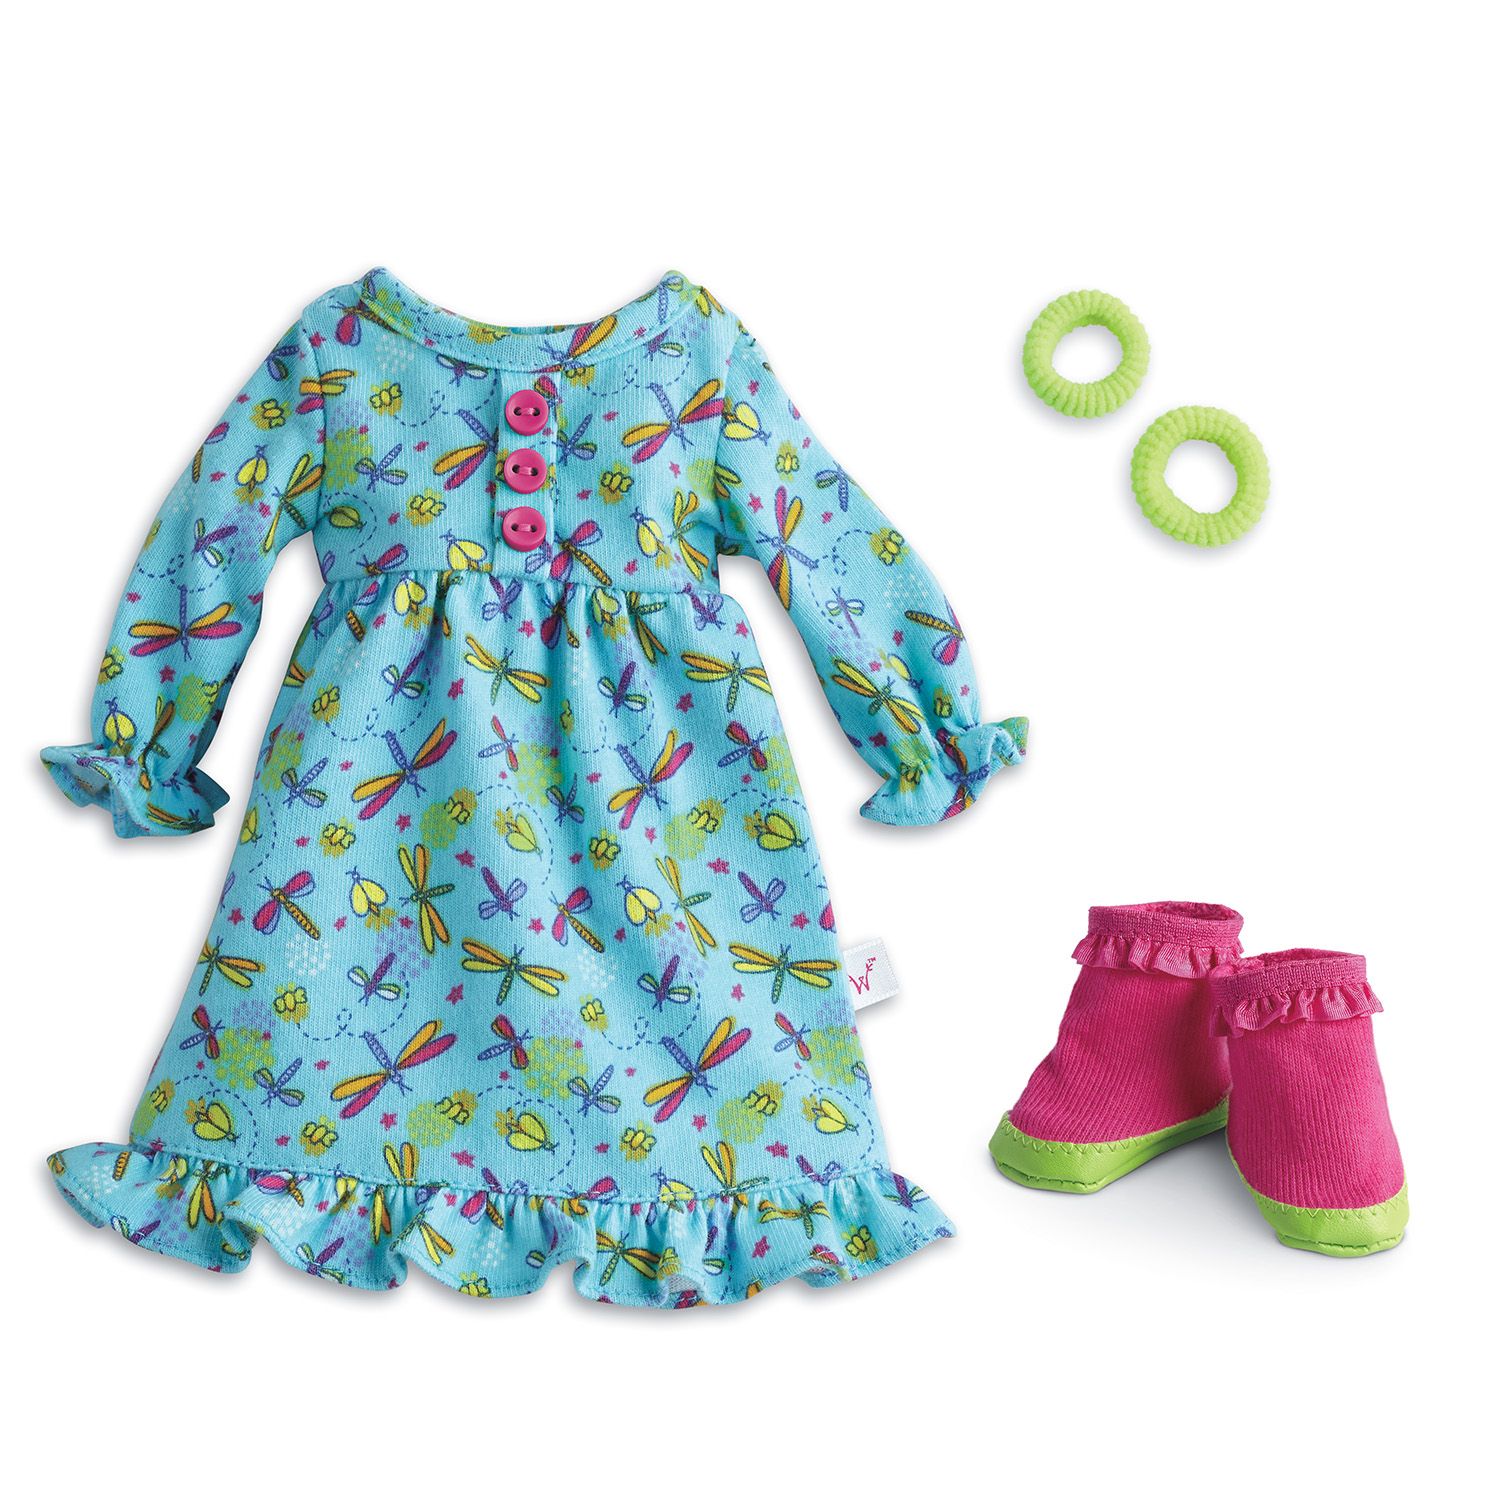 wellie wishers clothes kohls